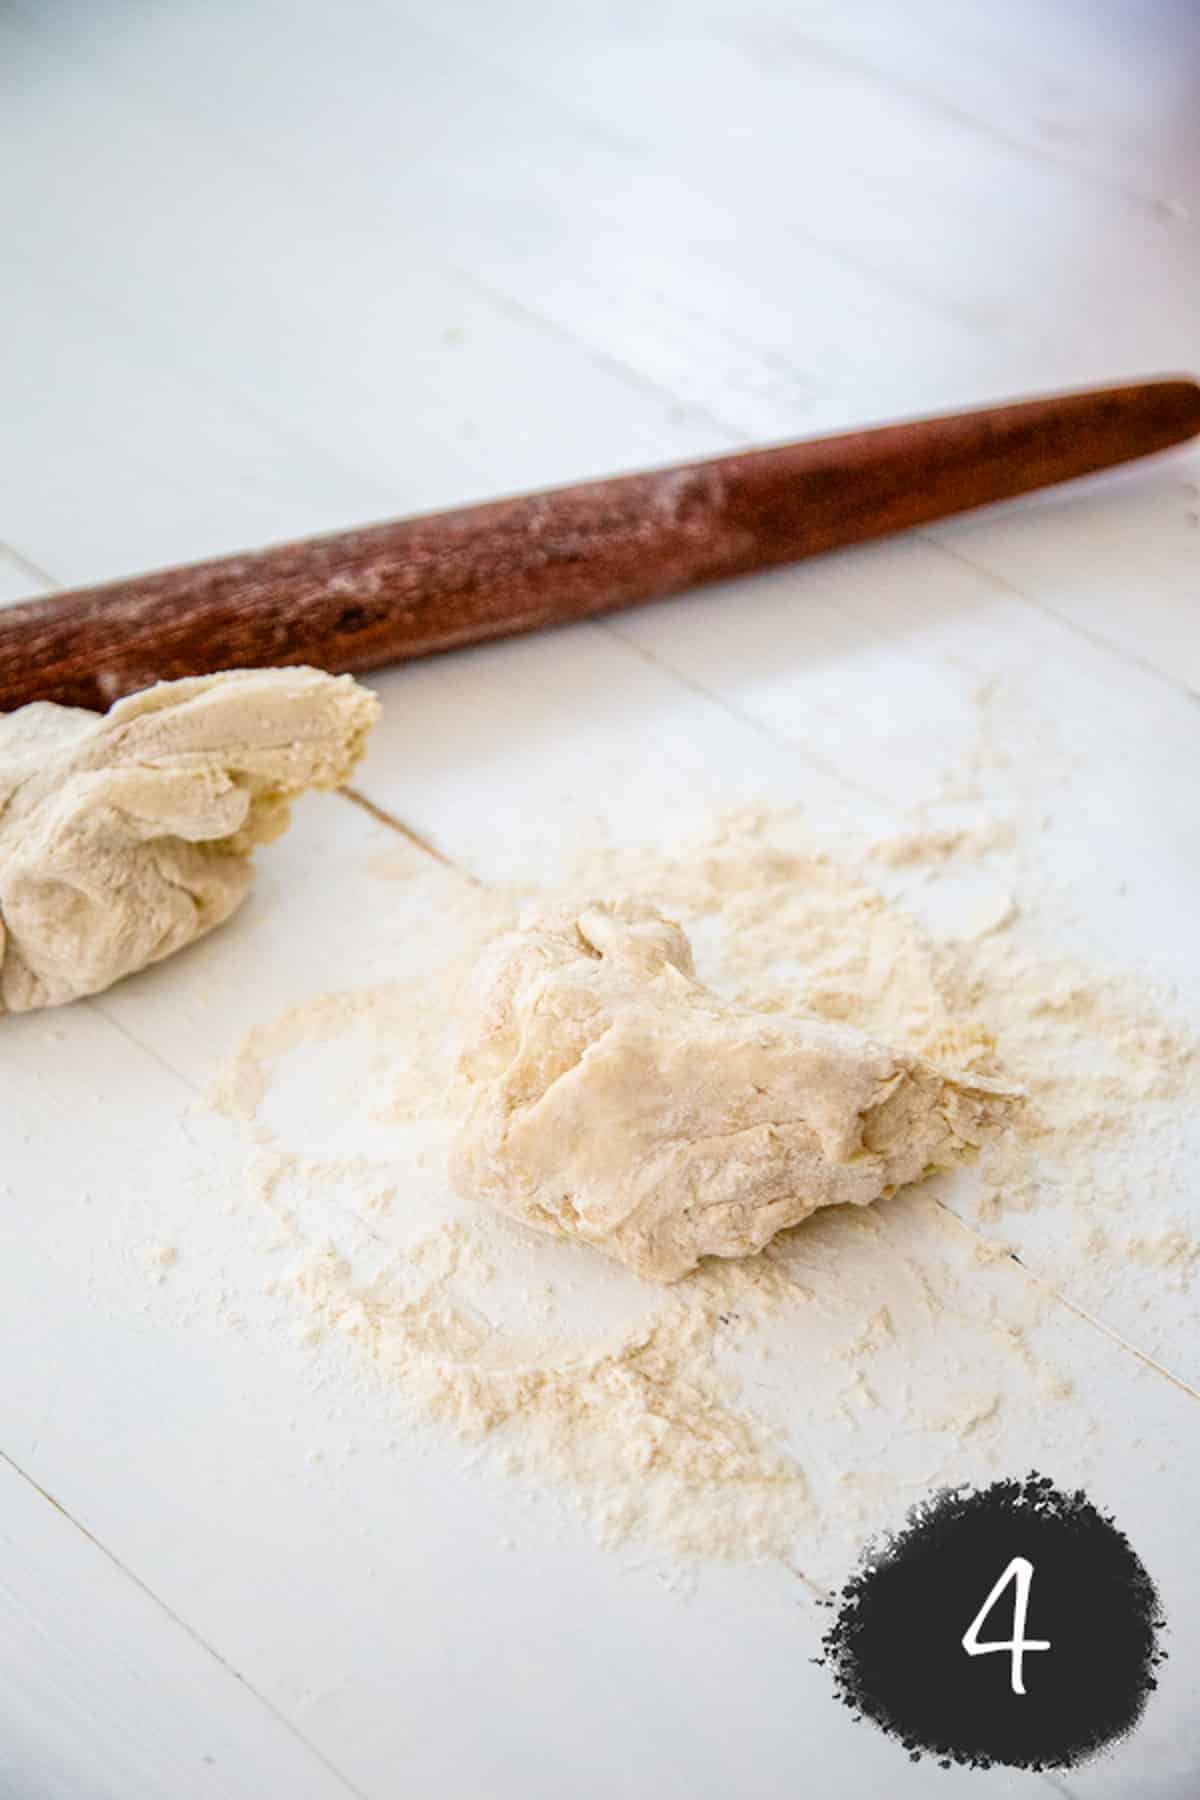 2 pieces of pizza dough and a wooden rolling pin.